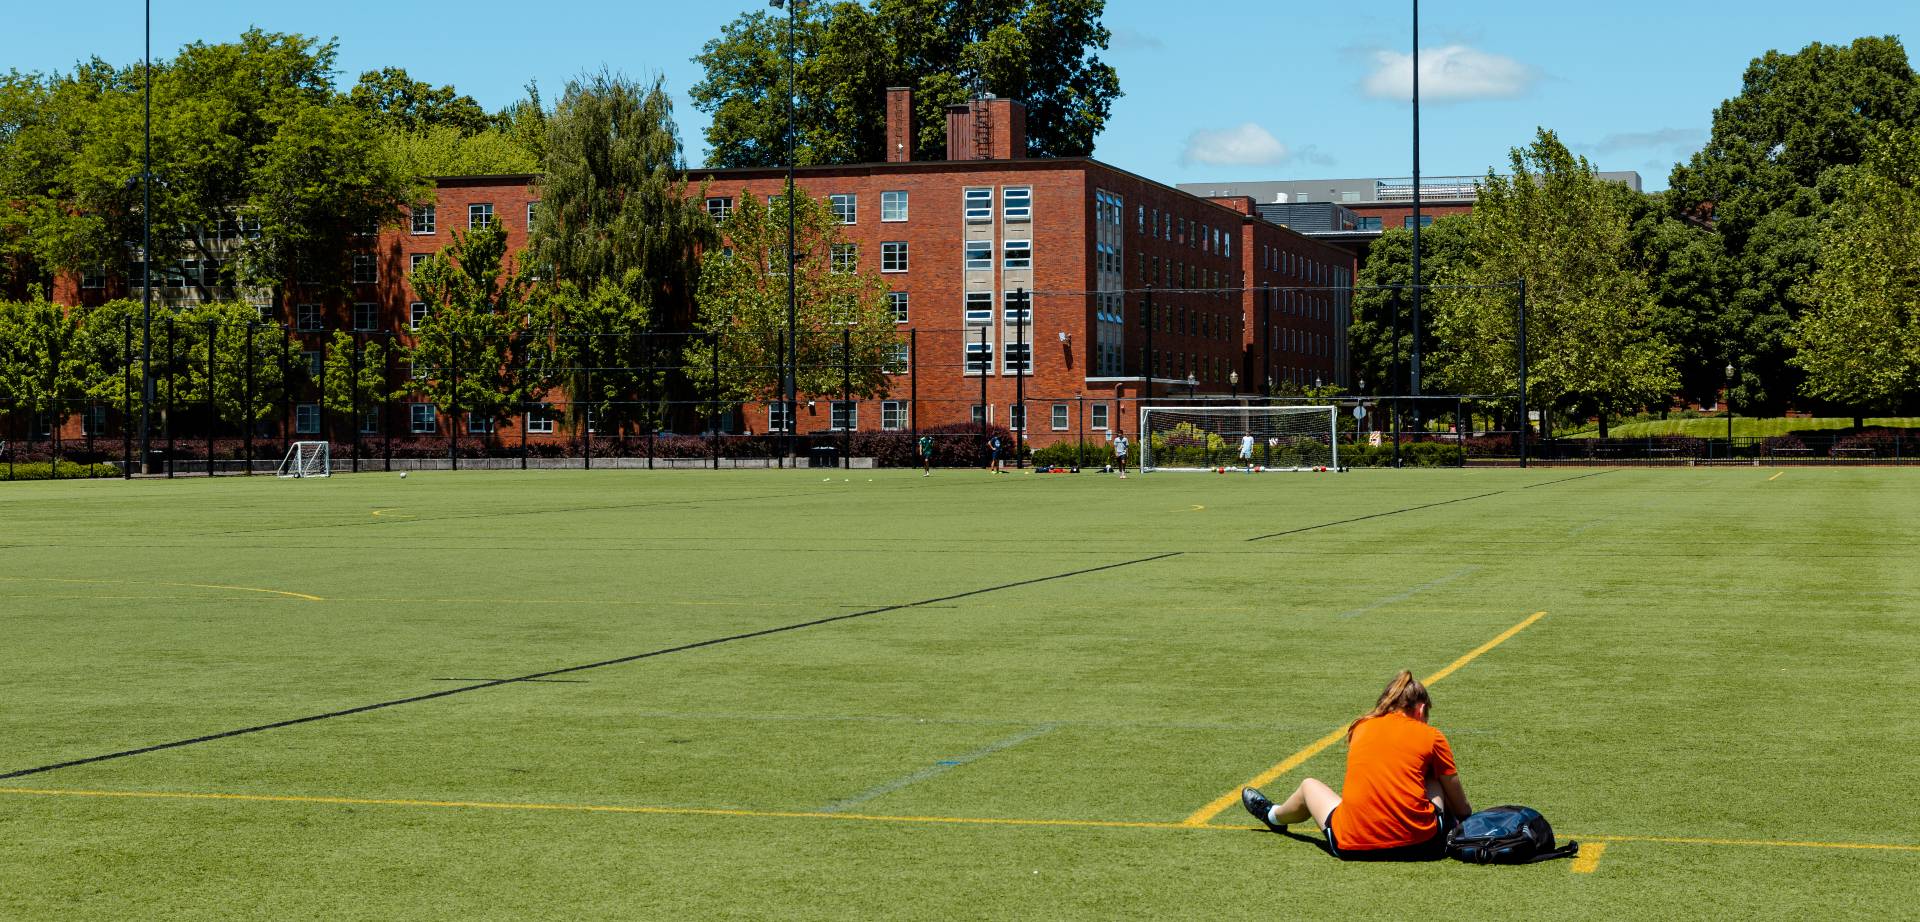 person sitting in a large field surrounded by brick buildings